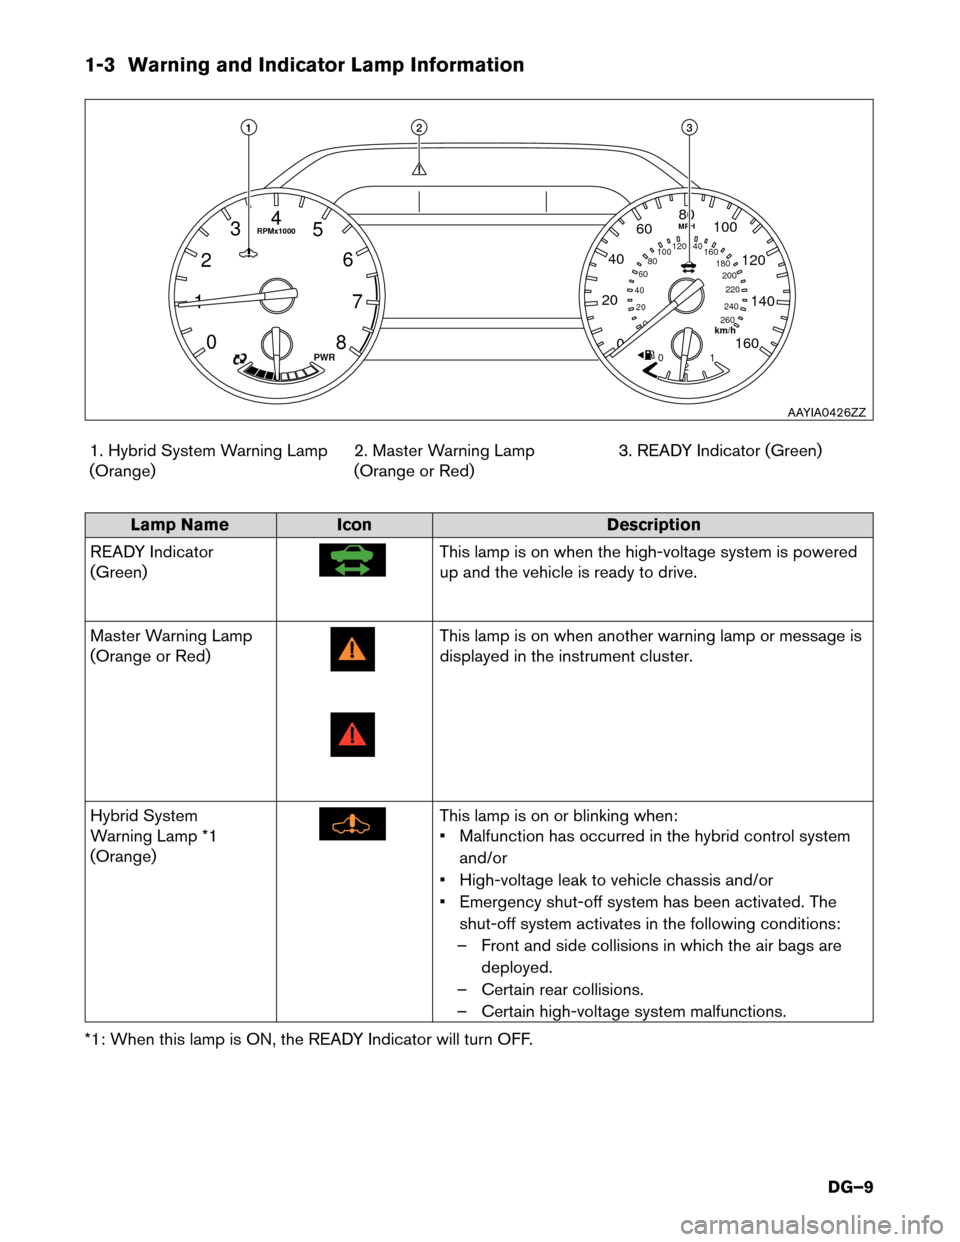 NISSAN MURANO HYBRID 2016 3.G Dismantling Guide 1-3 Warning and Indicator Lamp Information
1. Hybrid System Warning Lamp
(Orange) 2. Master Warning Lamp
(Orange or Red)3. READY Indicator (Green)Lamp Name
Icon Description
READ
 Y Indicator
(Green) T